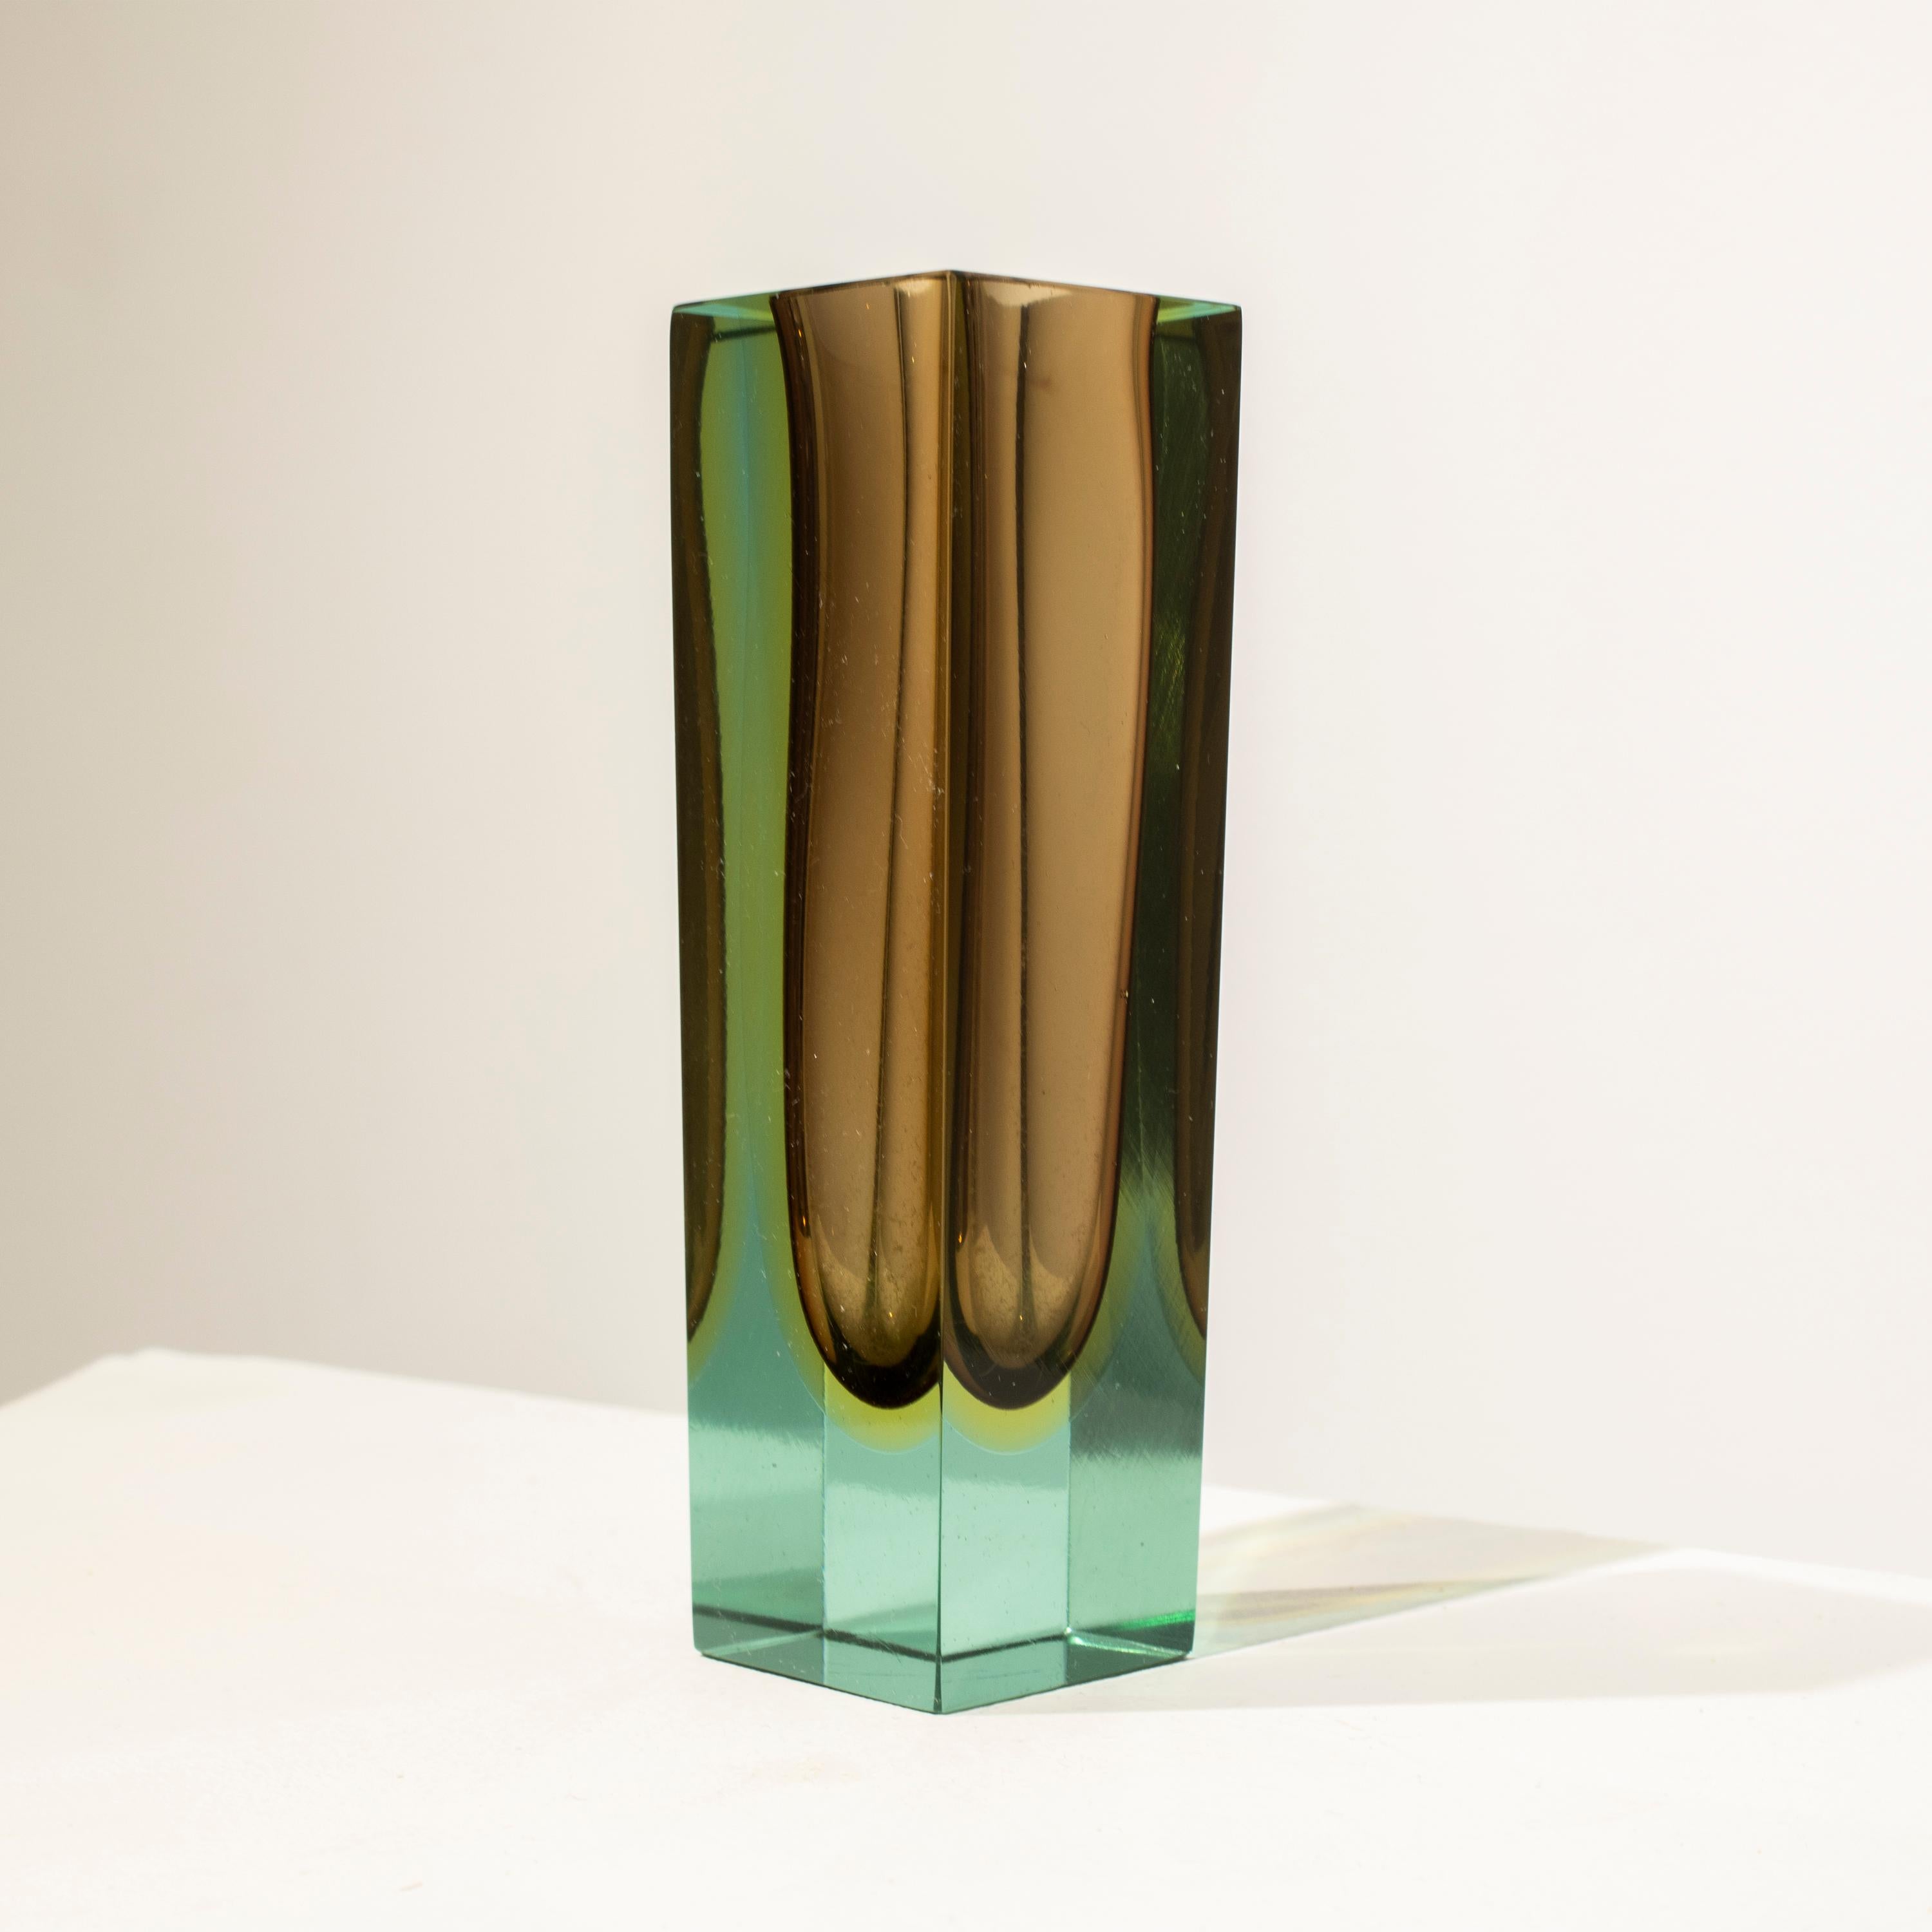 Italian small vase designed by Flavio Poli in the 1970´s. The vase is hand-crafted in Murano glass with a square shape, in different colors with predominant brown.